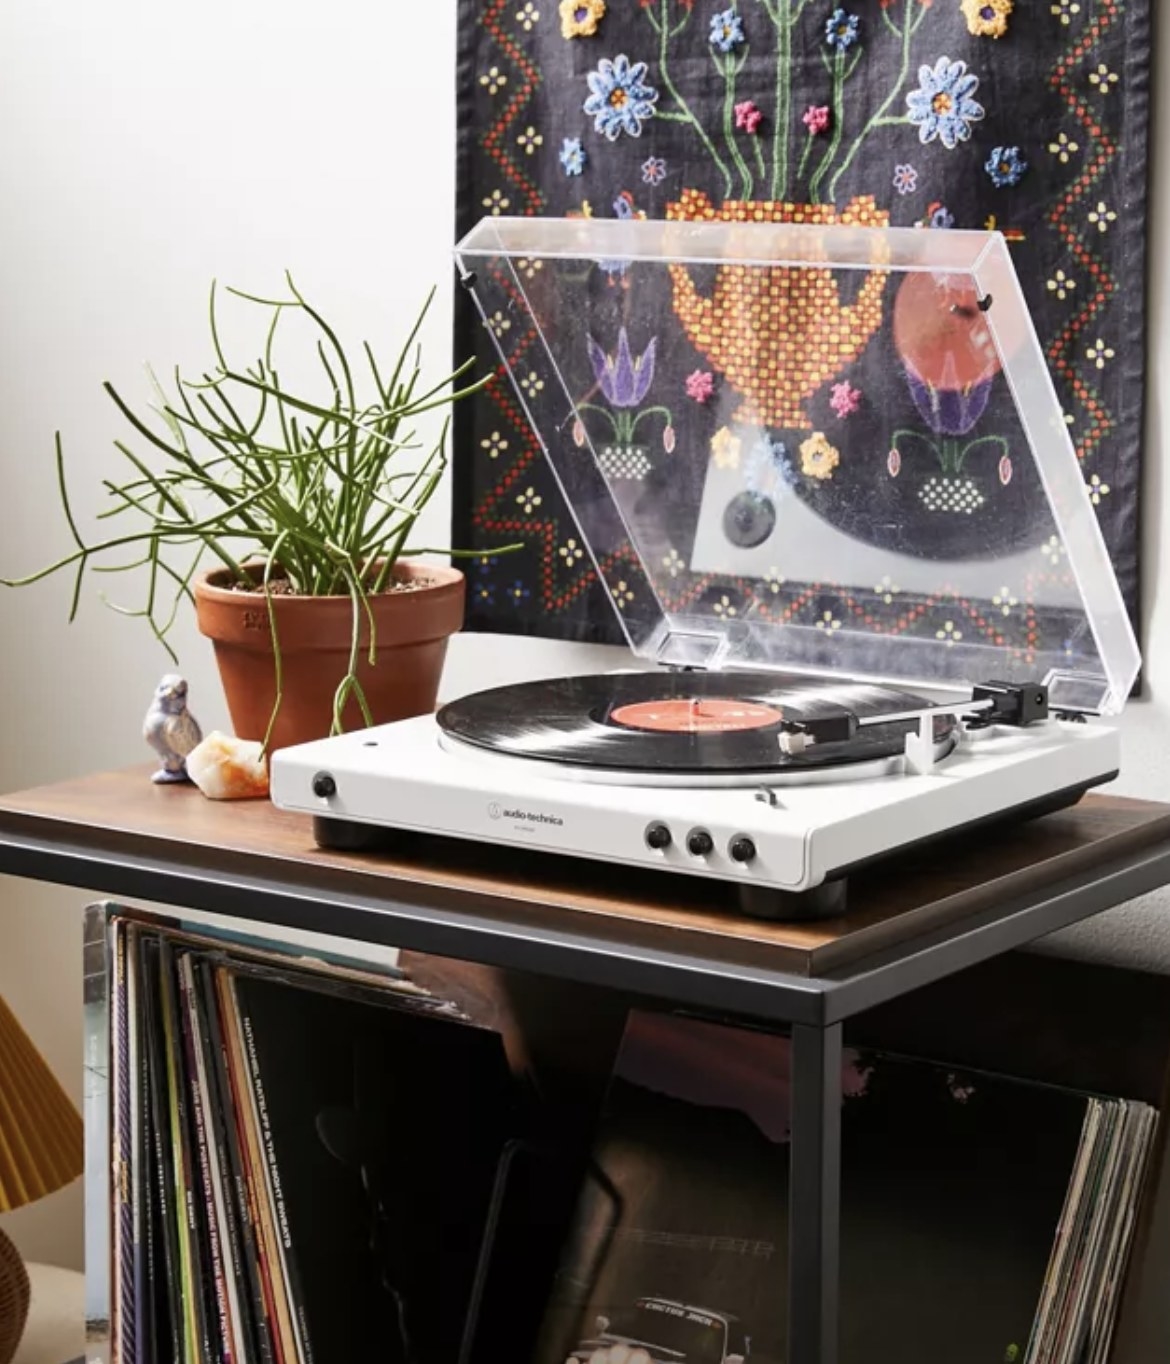 The record player is stacked on an organizer with records and other trinkets nearby